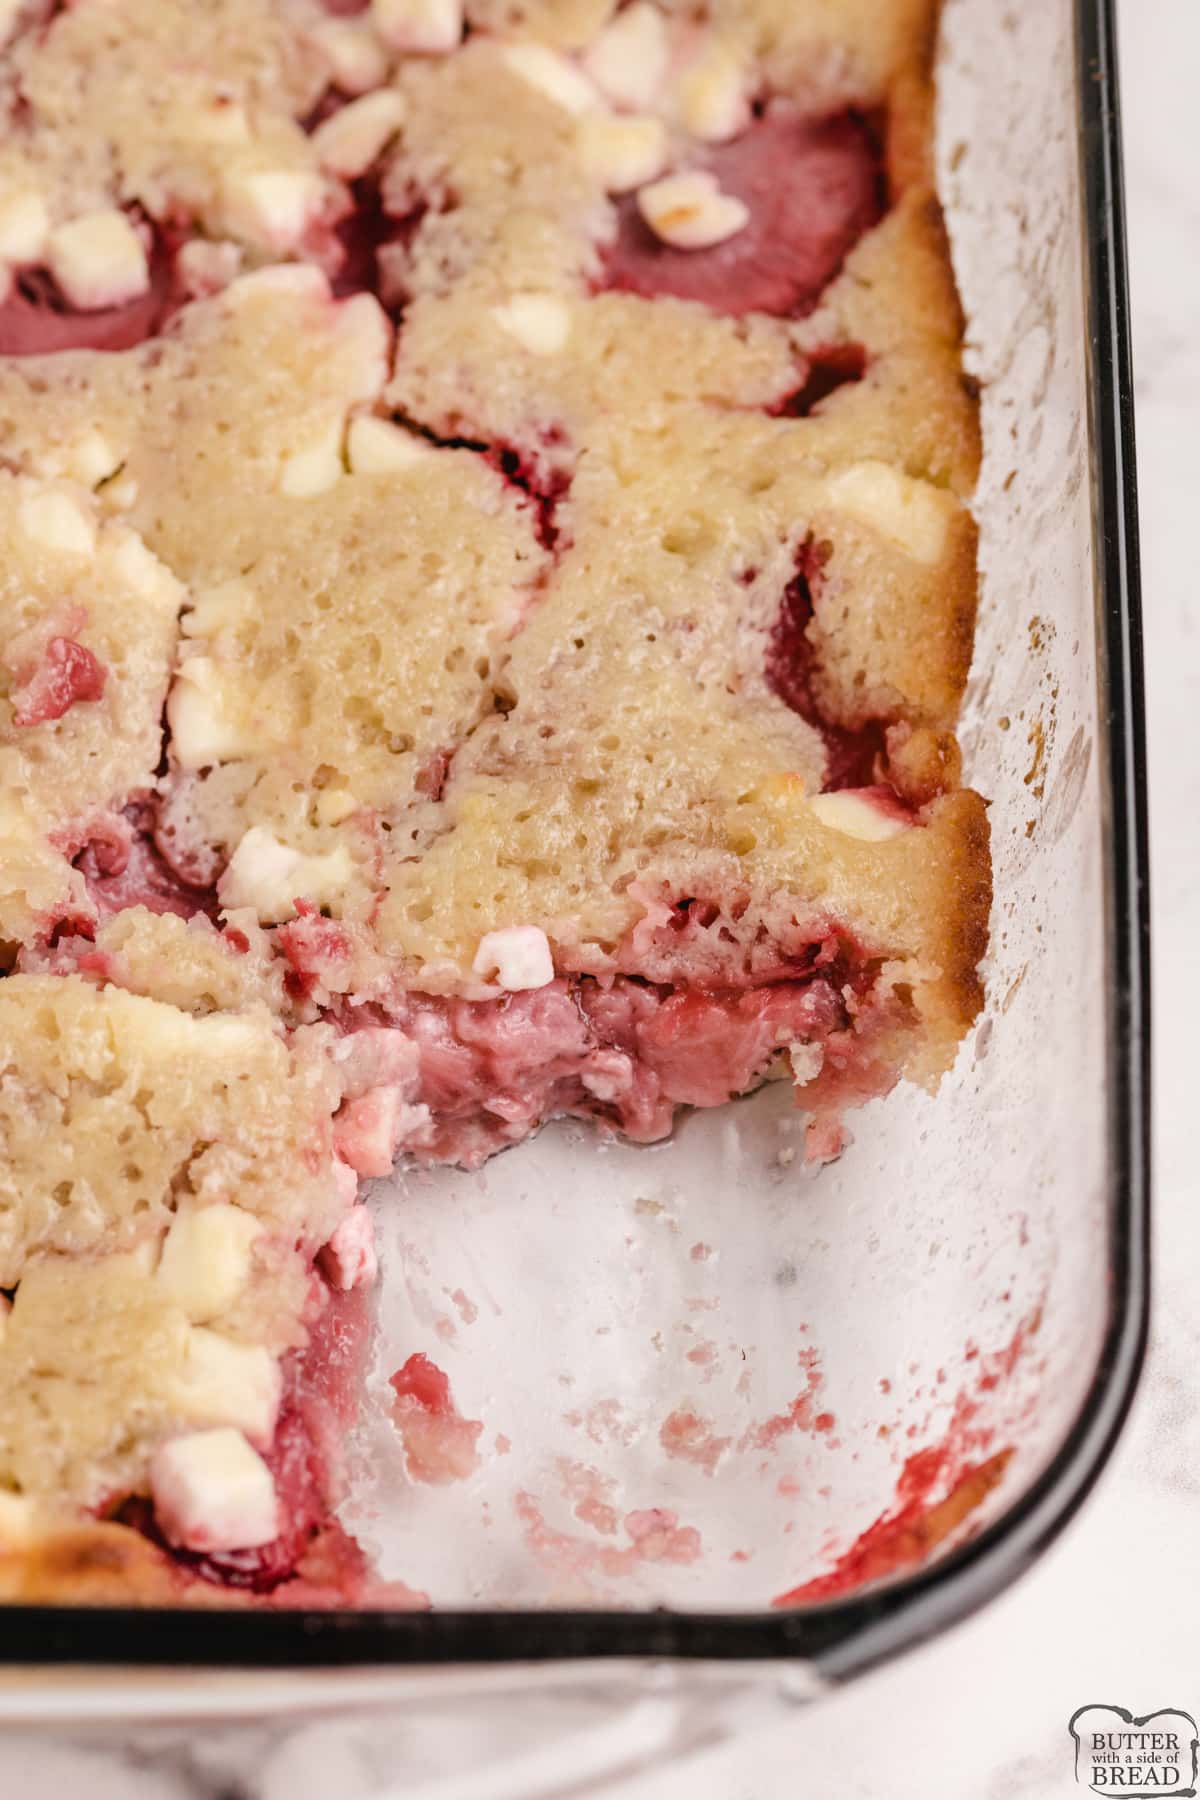 Strawberry cobbler made from scratch